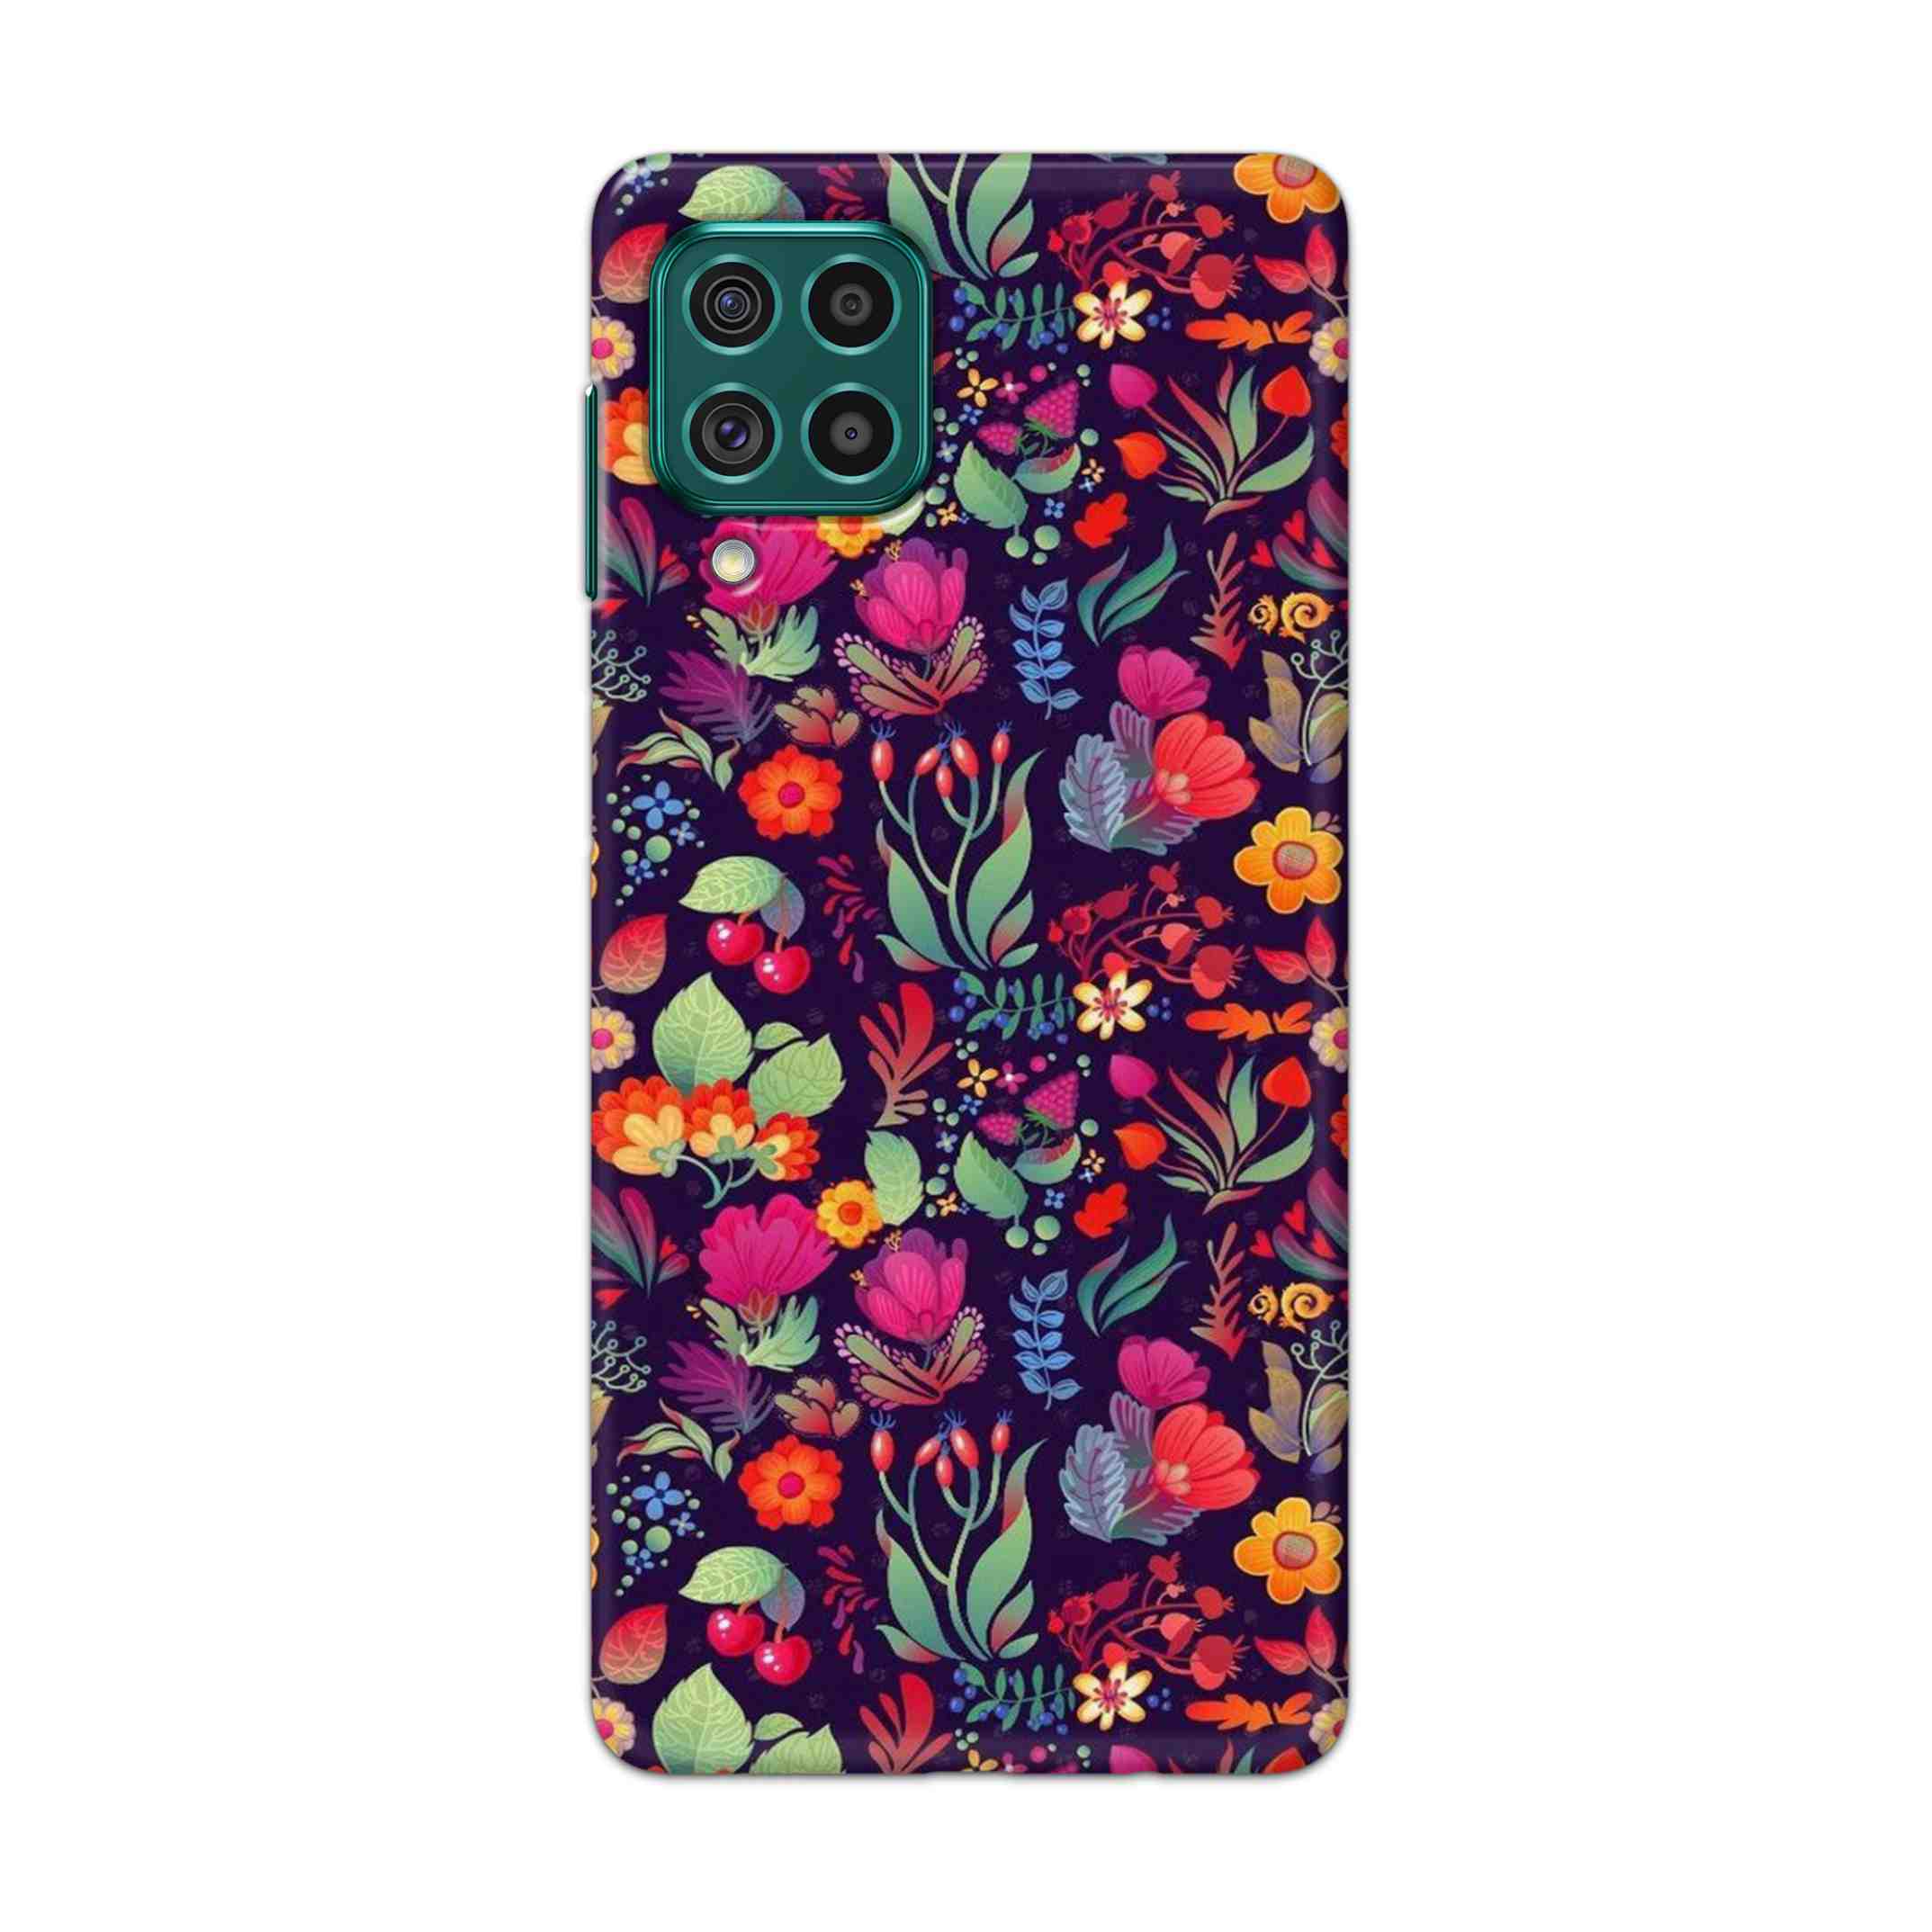 Buy Fruits Flower Hard Back Mobile Phone Case Cover For Galaxy F62 Online